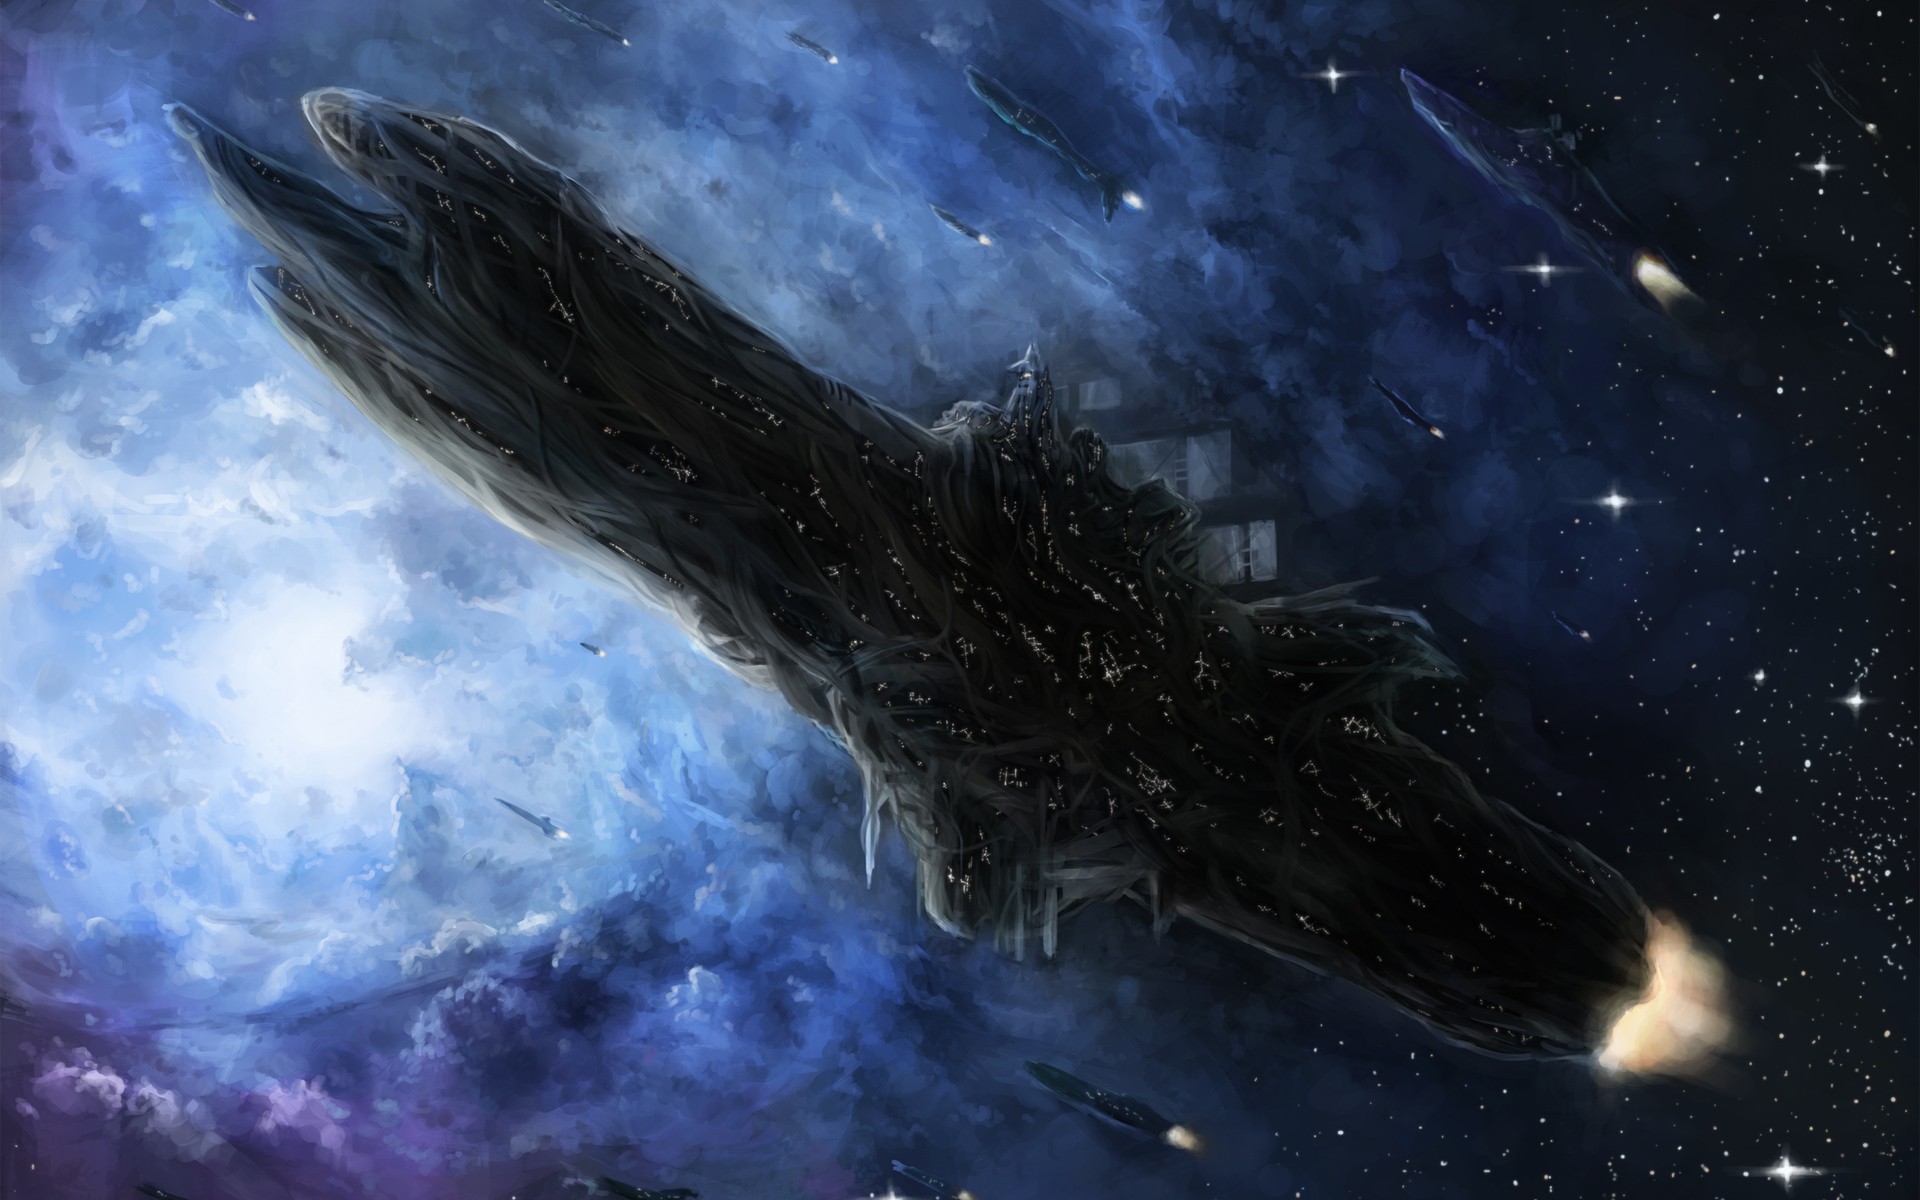 outer, Space, Futuristic, Spaceships, Artwork, Vehicles Wallpaper